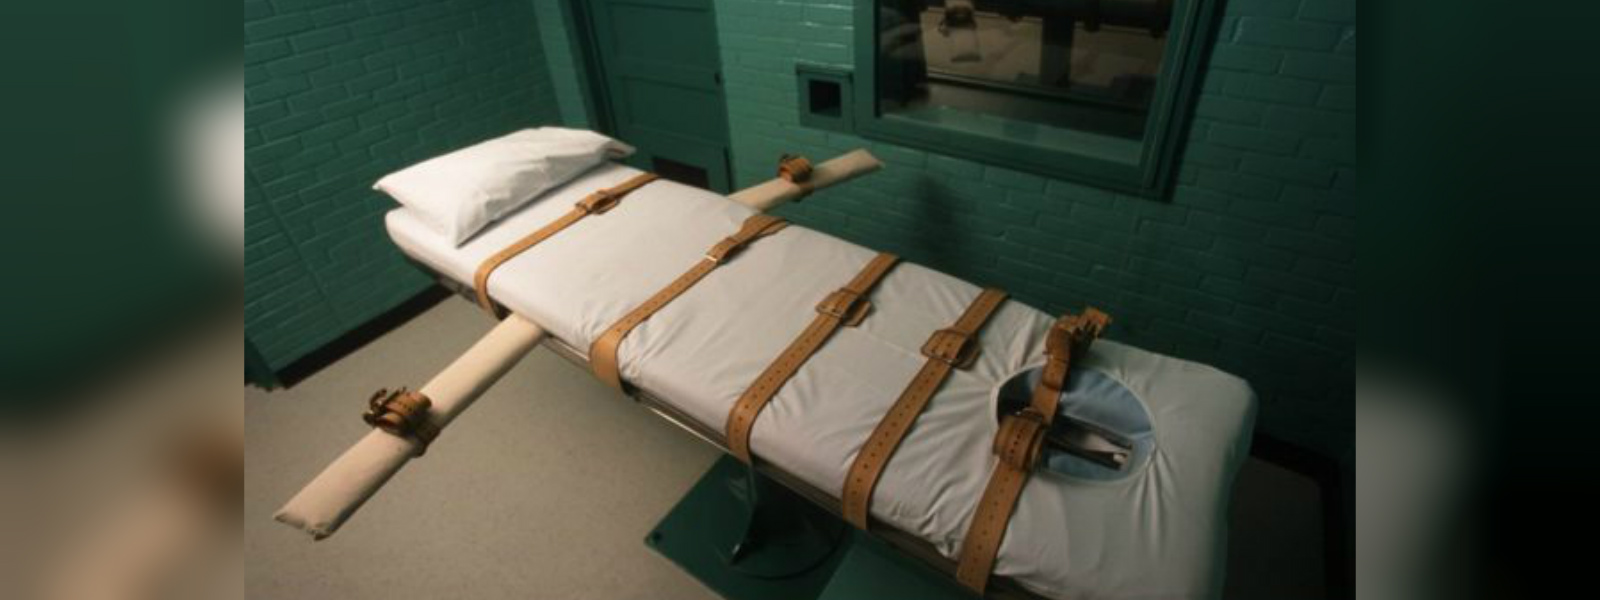 US government death penalty criticized